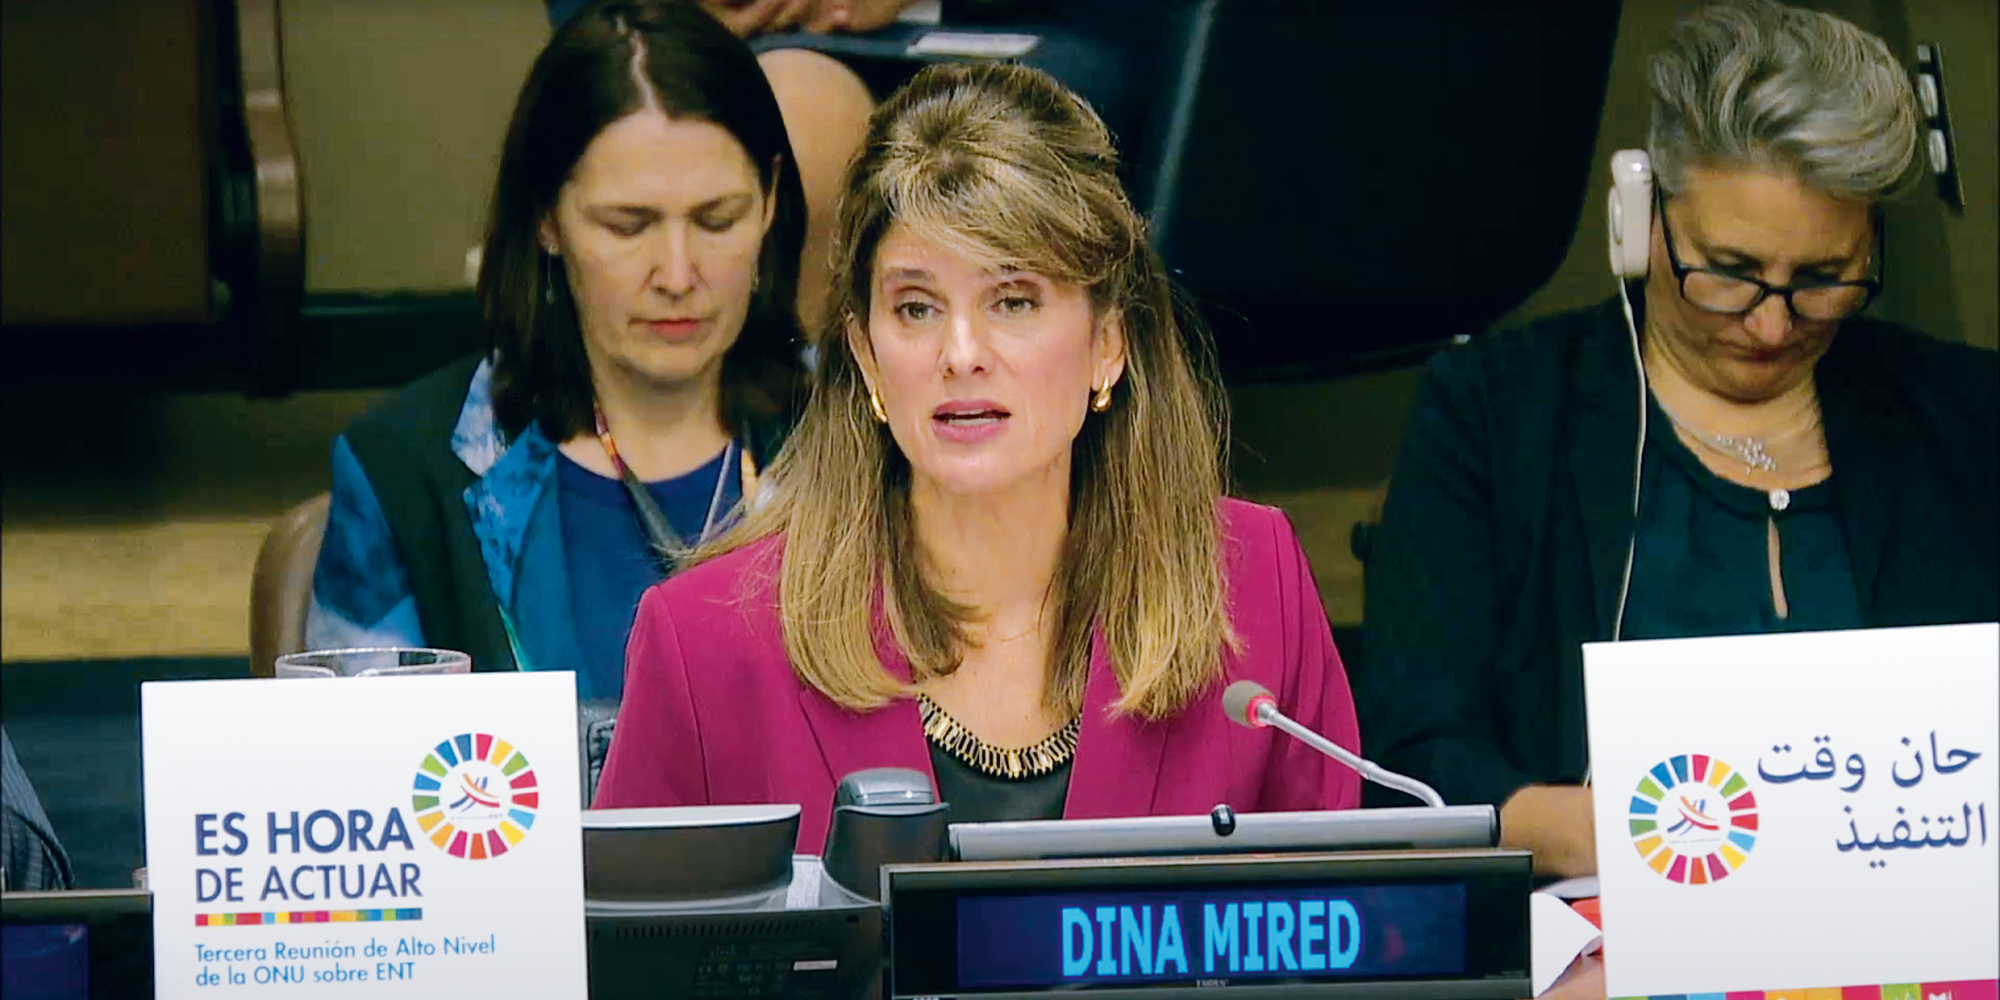 Her Royal Highness Princess Dina Mired of Jordan speaking on behalf of civil society as an 'Eminent Champion' of non-communicable diseases at the United Nations General Assembly Third High-level Meeting on NCDs in New York in 2018